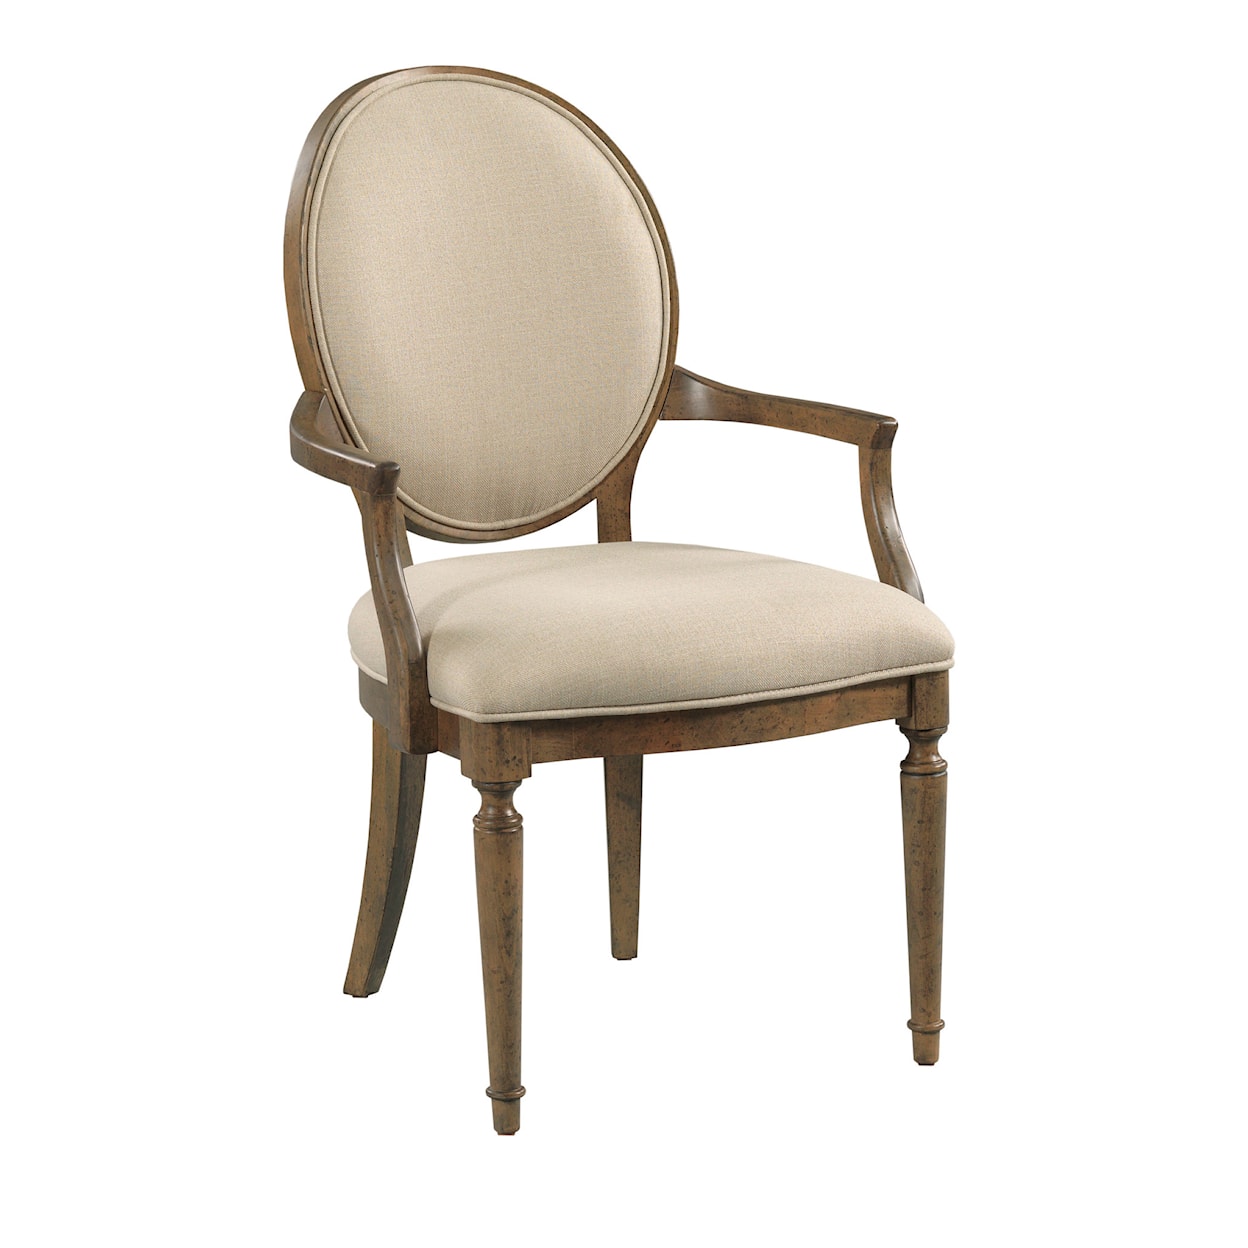 Kincaid Furniture Ansley Cecil Oval Back Uph Arm Chair